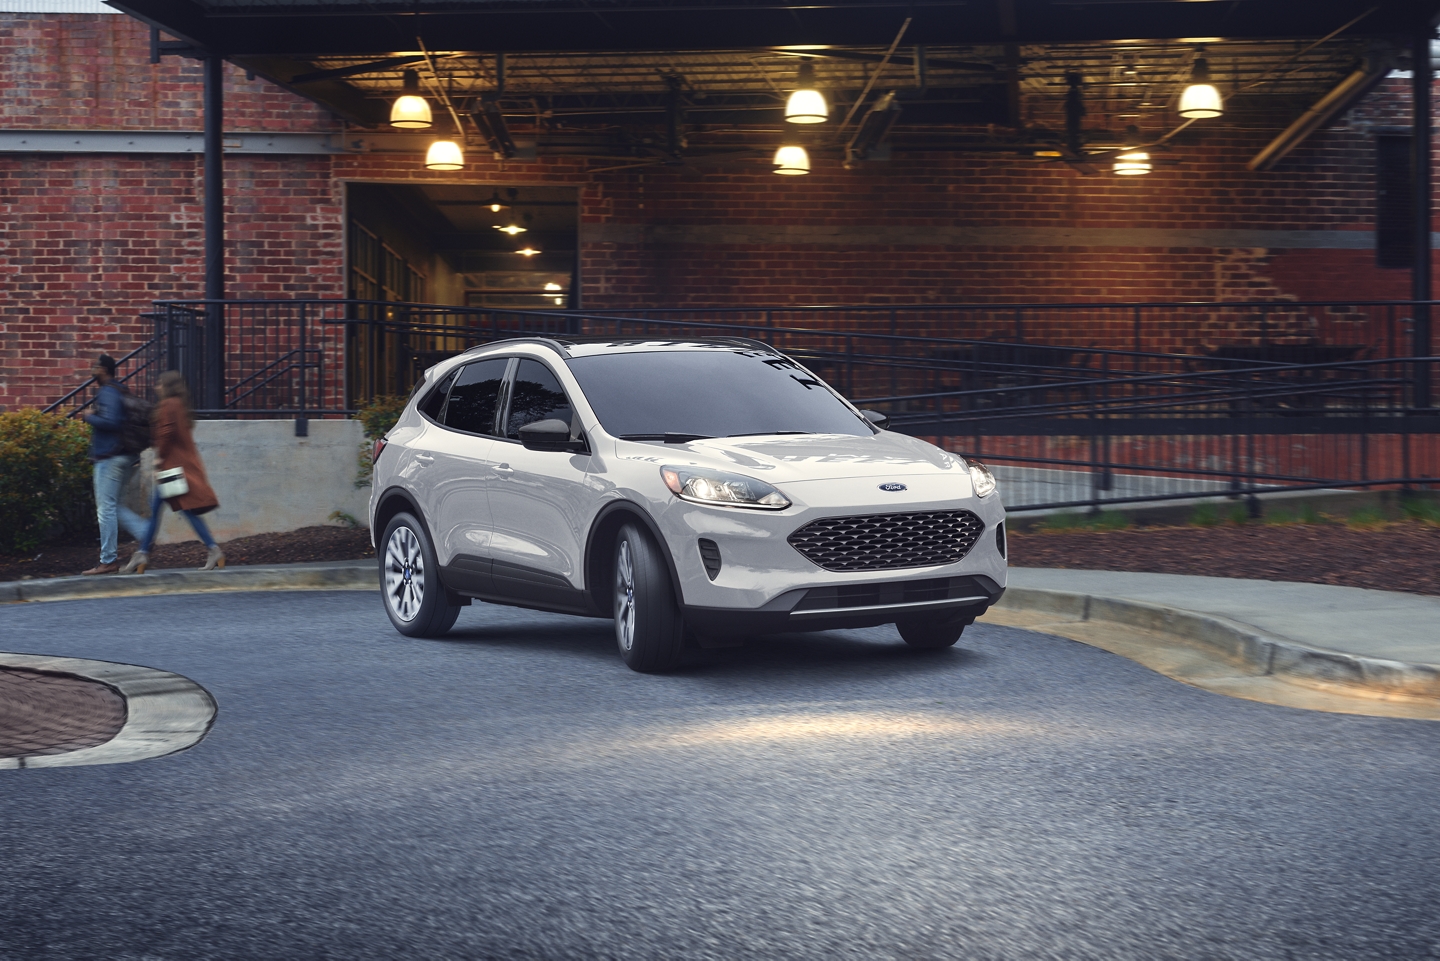 https://ford-h.assetsadobe.com/is/image/content/dam/vdm_ford/live/en_us/ford/nameplate/escape/2020/collections/dm/20_FRD_ESP_46642.tif?croppathe=1_3x2&wid=1440 [city] [state] [st]